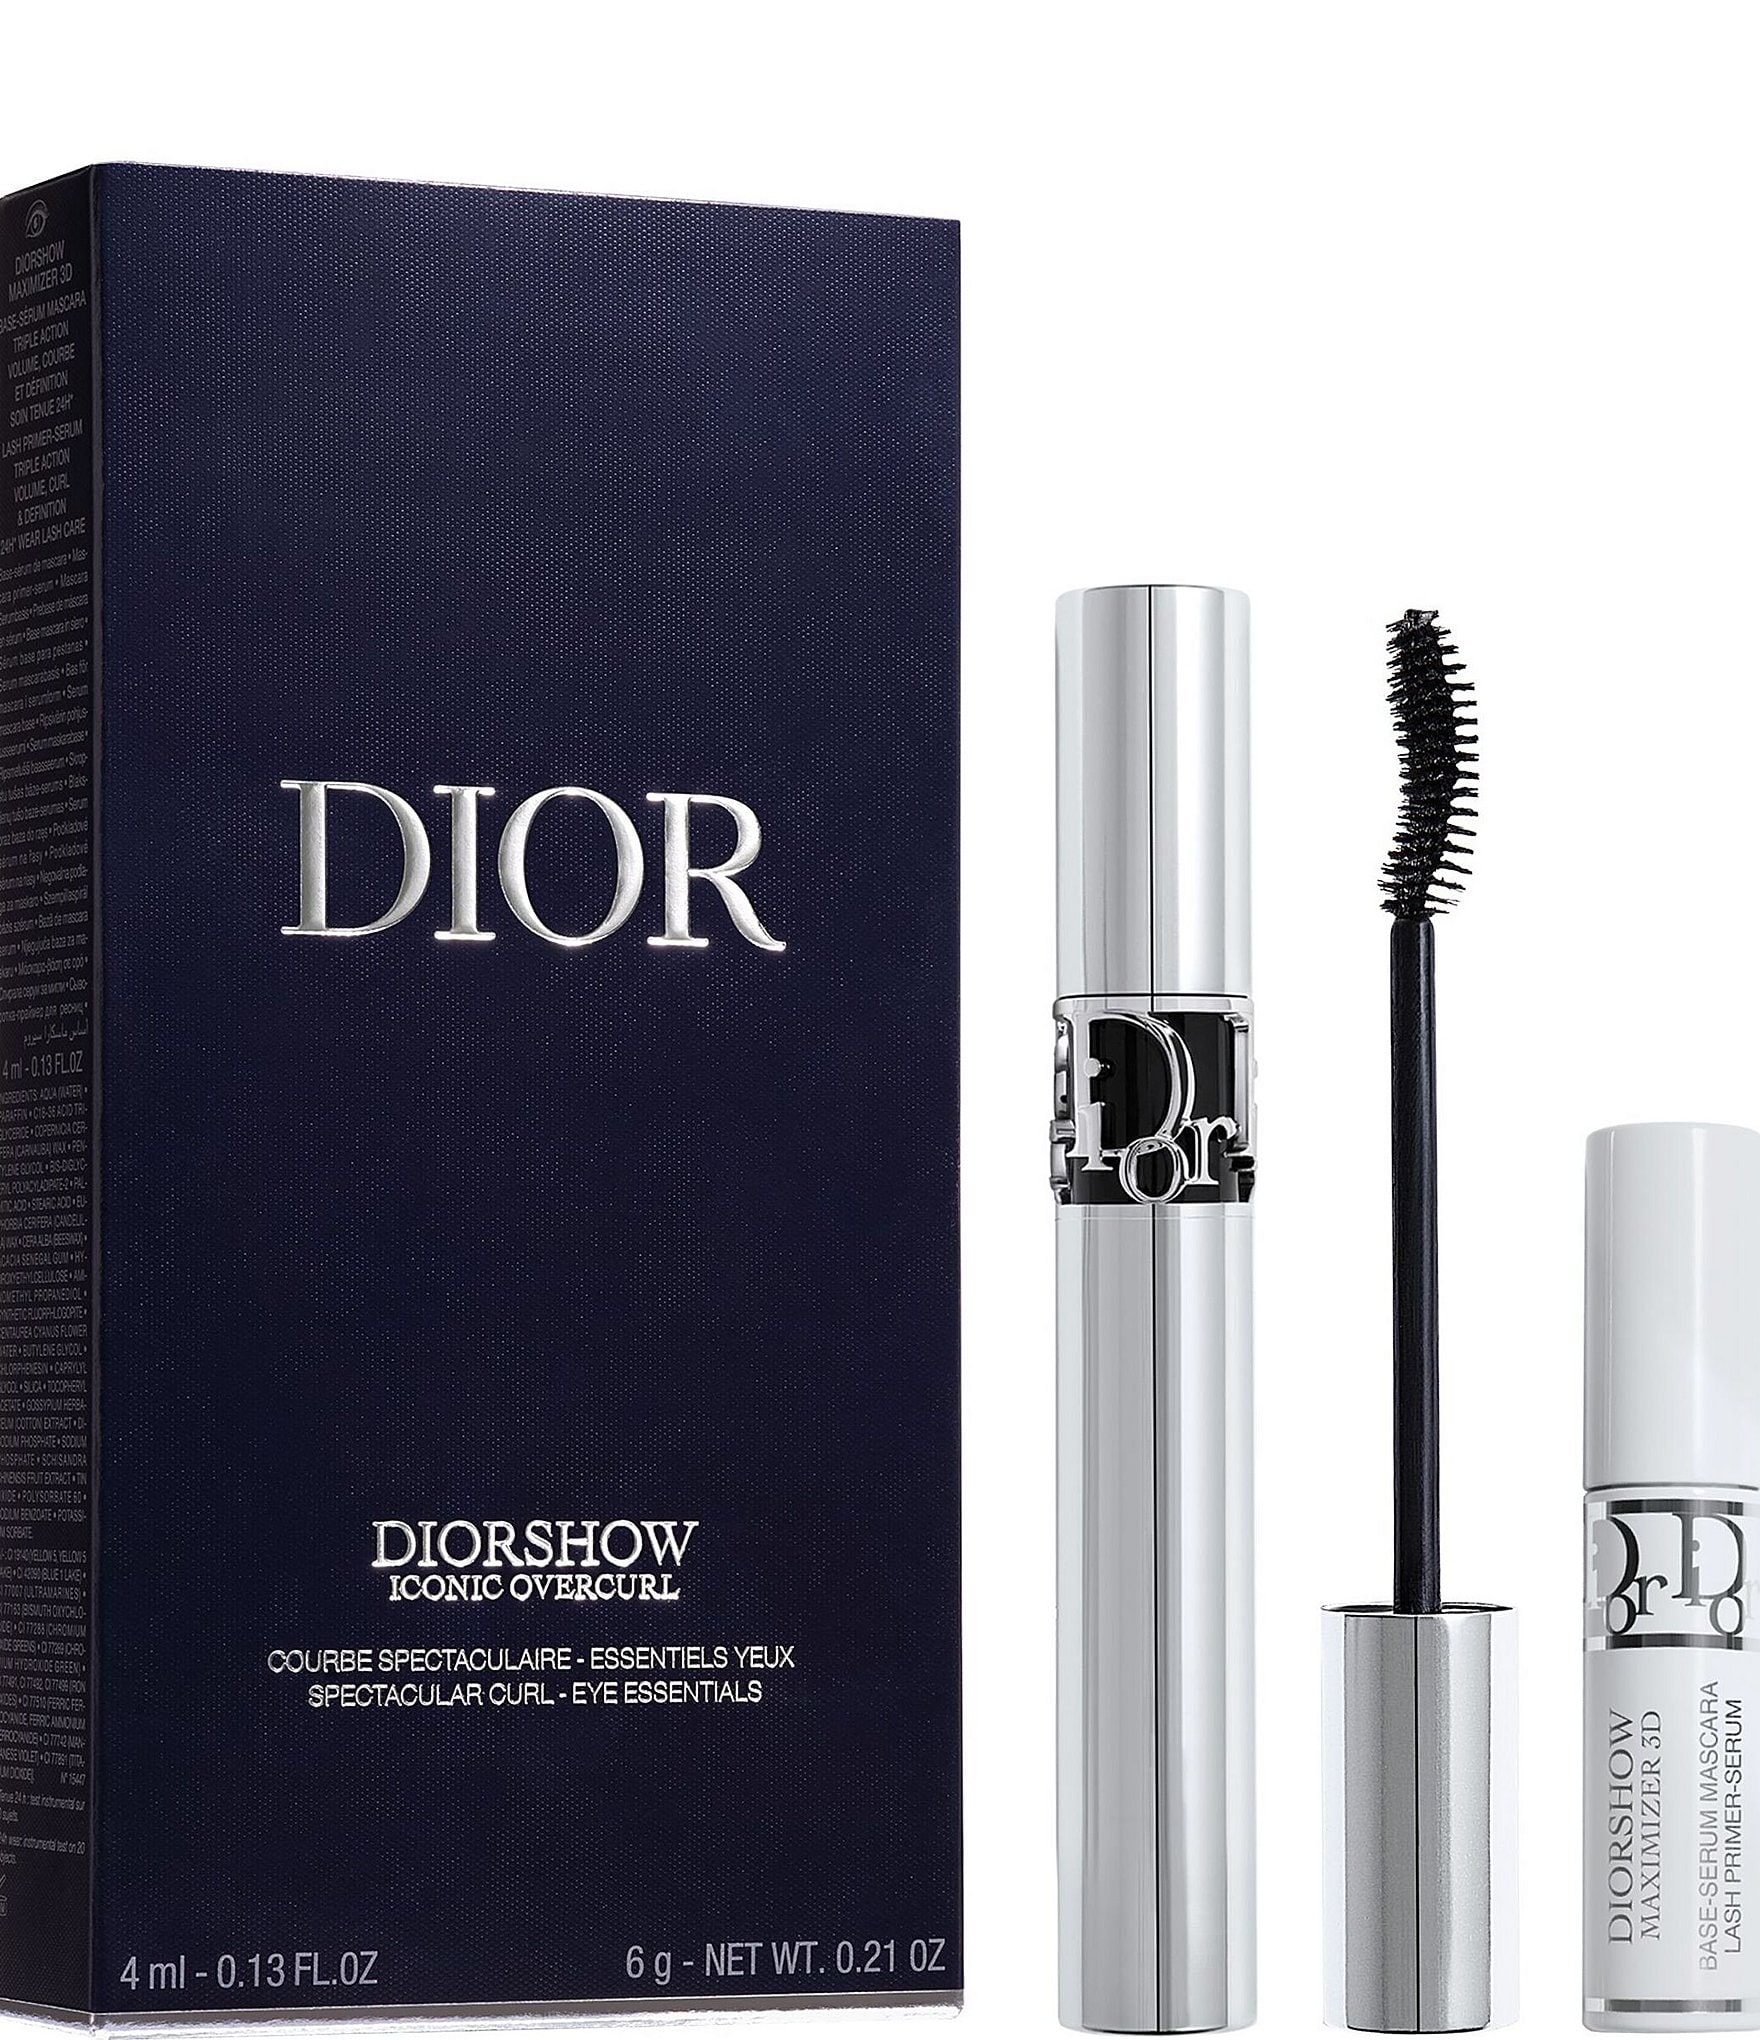 Ruqaiya Khan DIORSHOW Iconic Overcurl Mascara and Maximizer 3D  Review  and Swatches